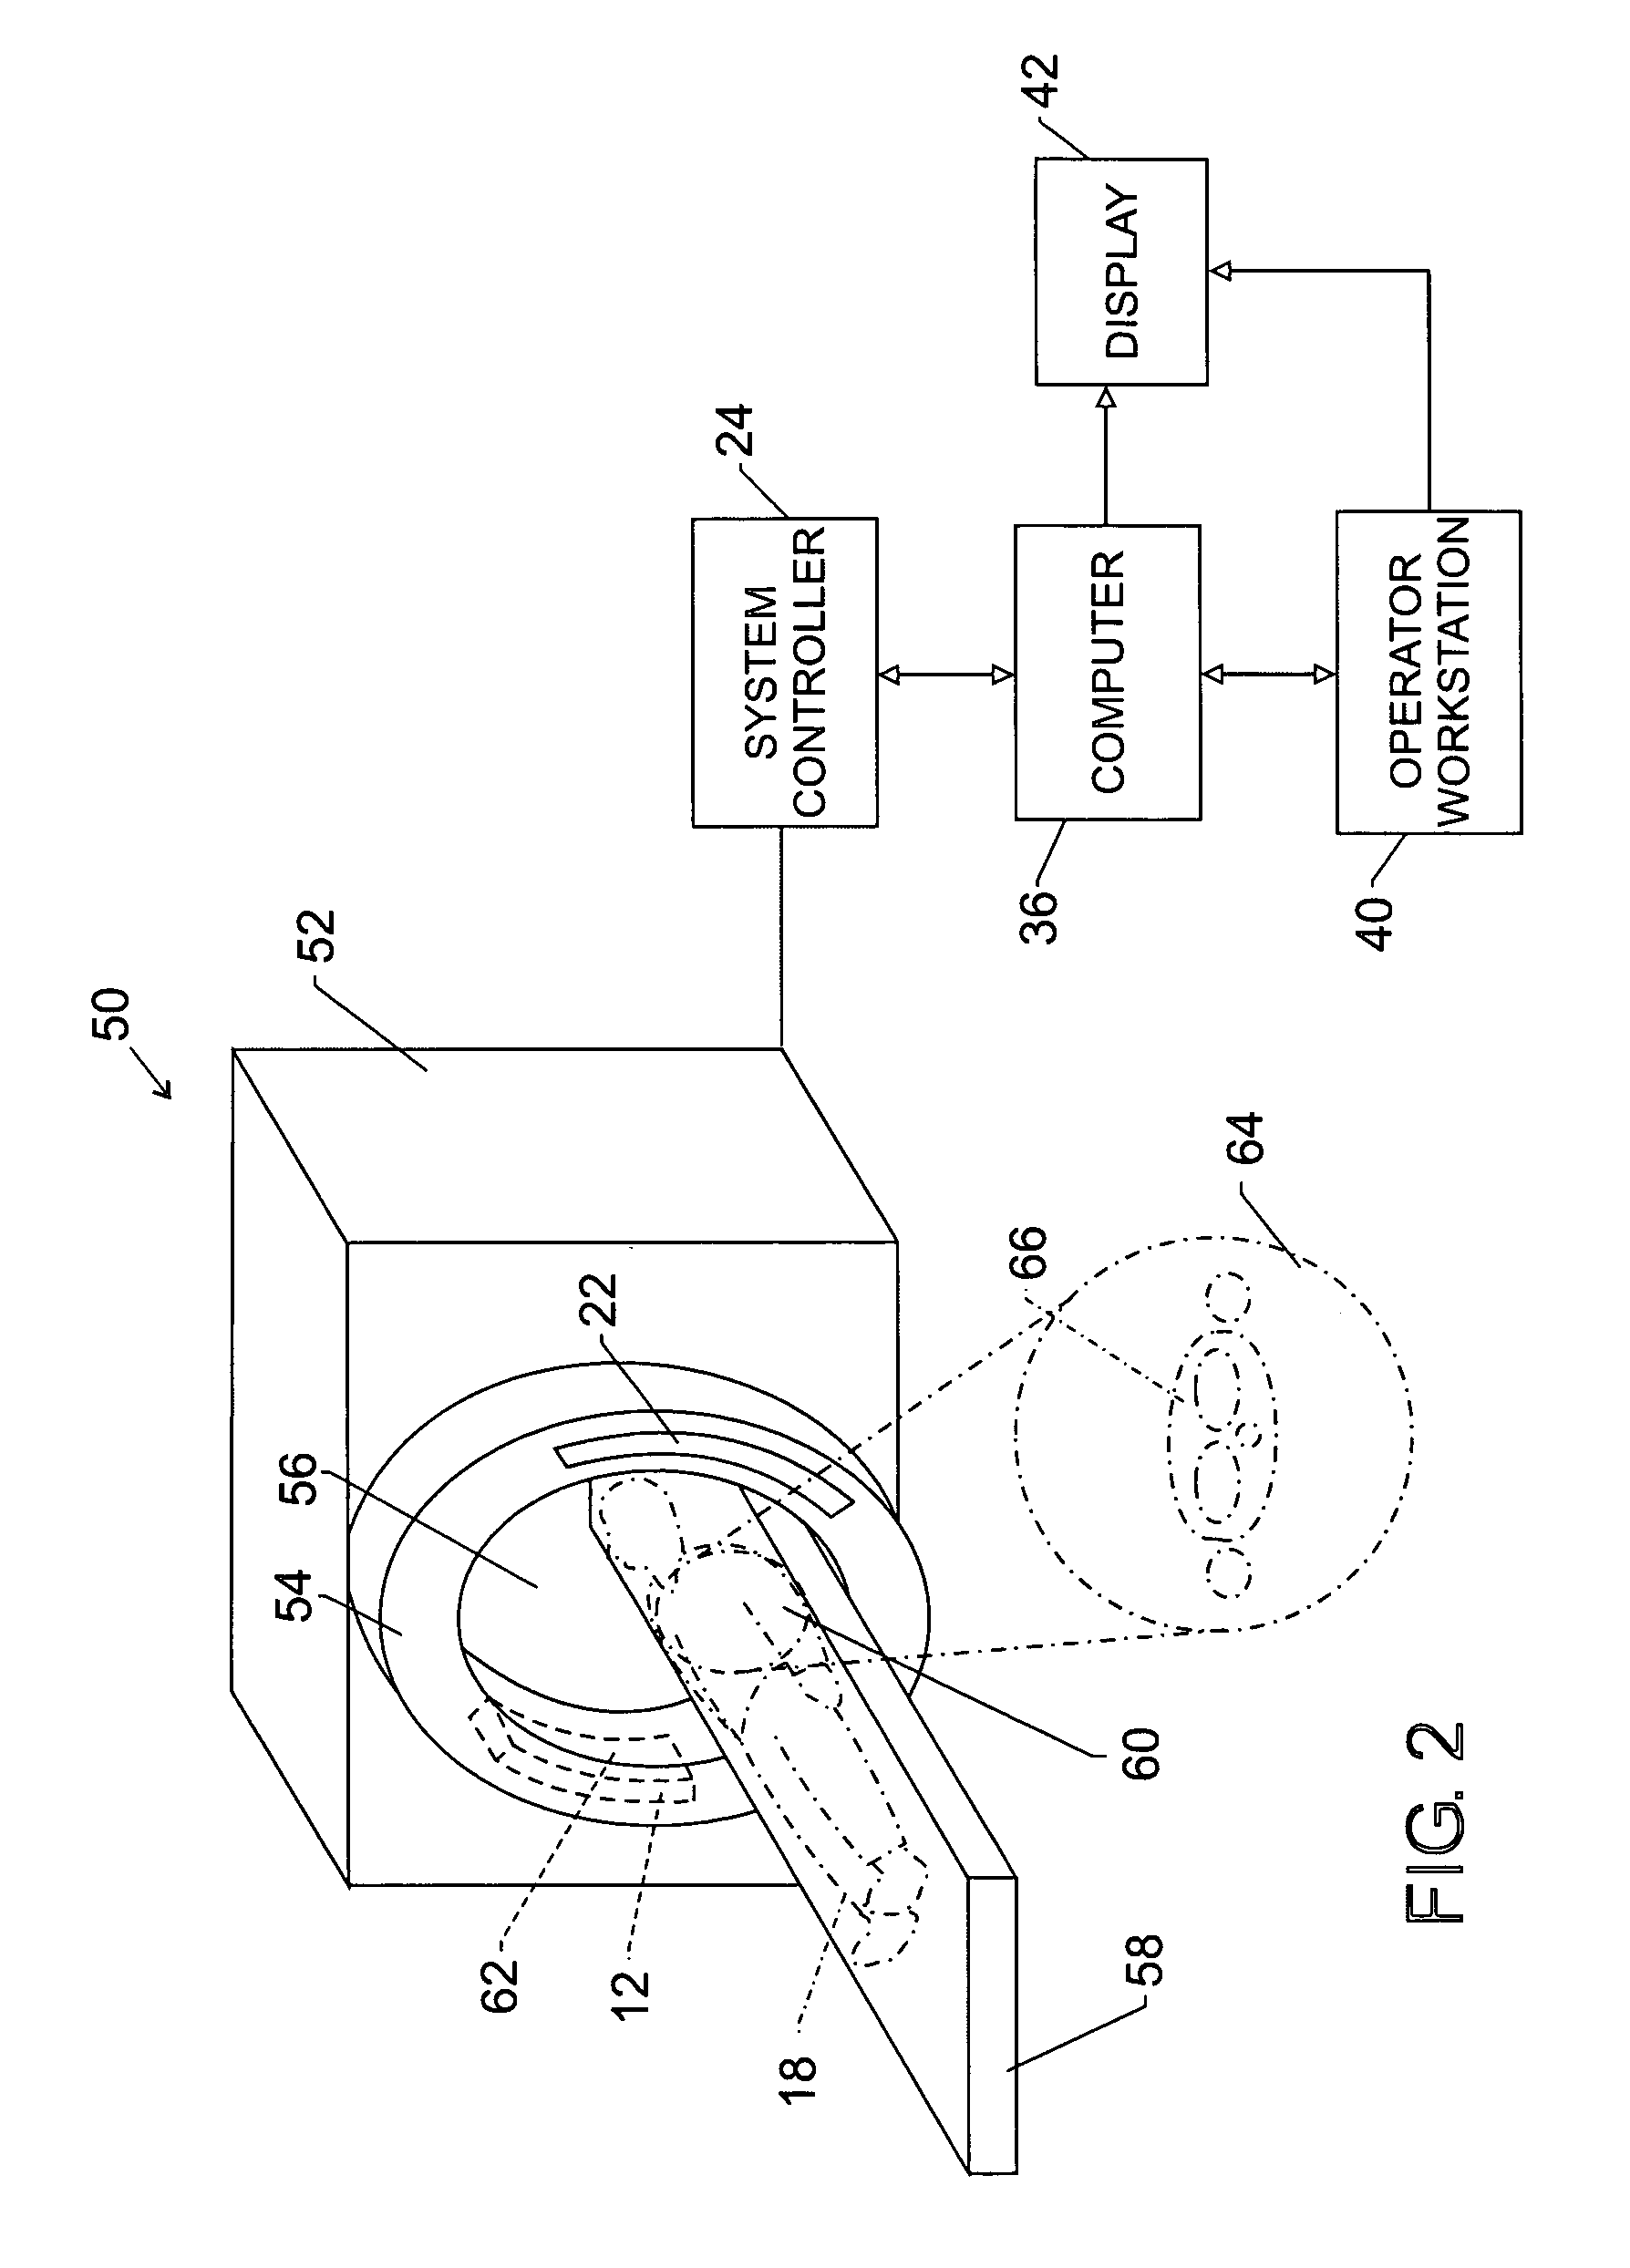 Image-based indicia obfuscation system and method